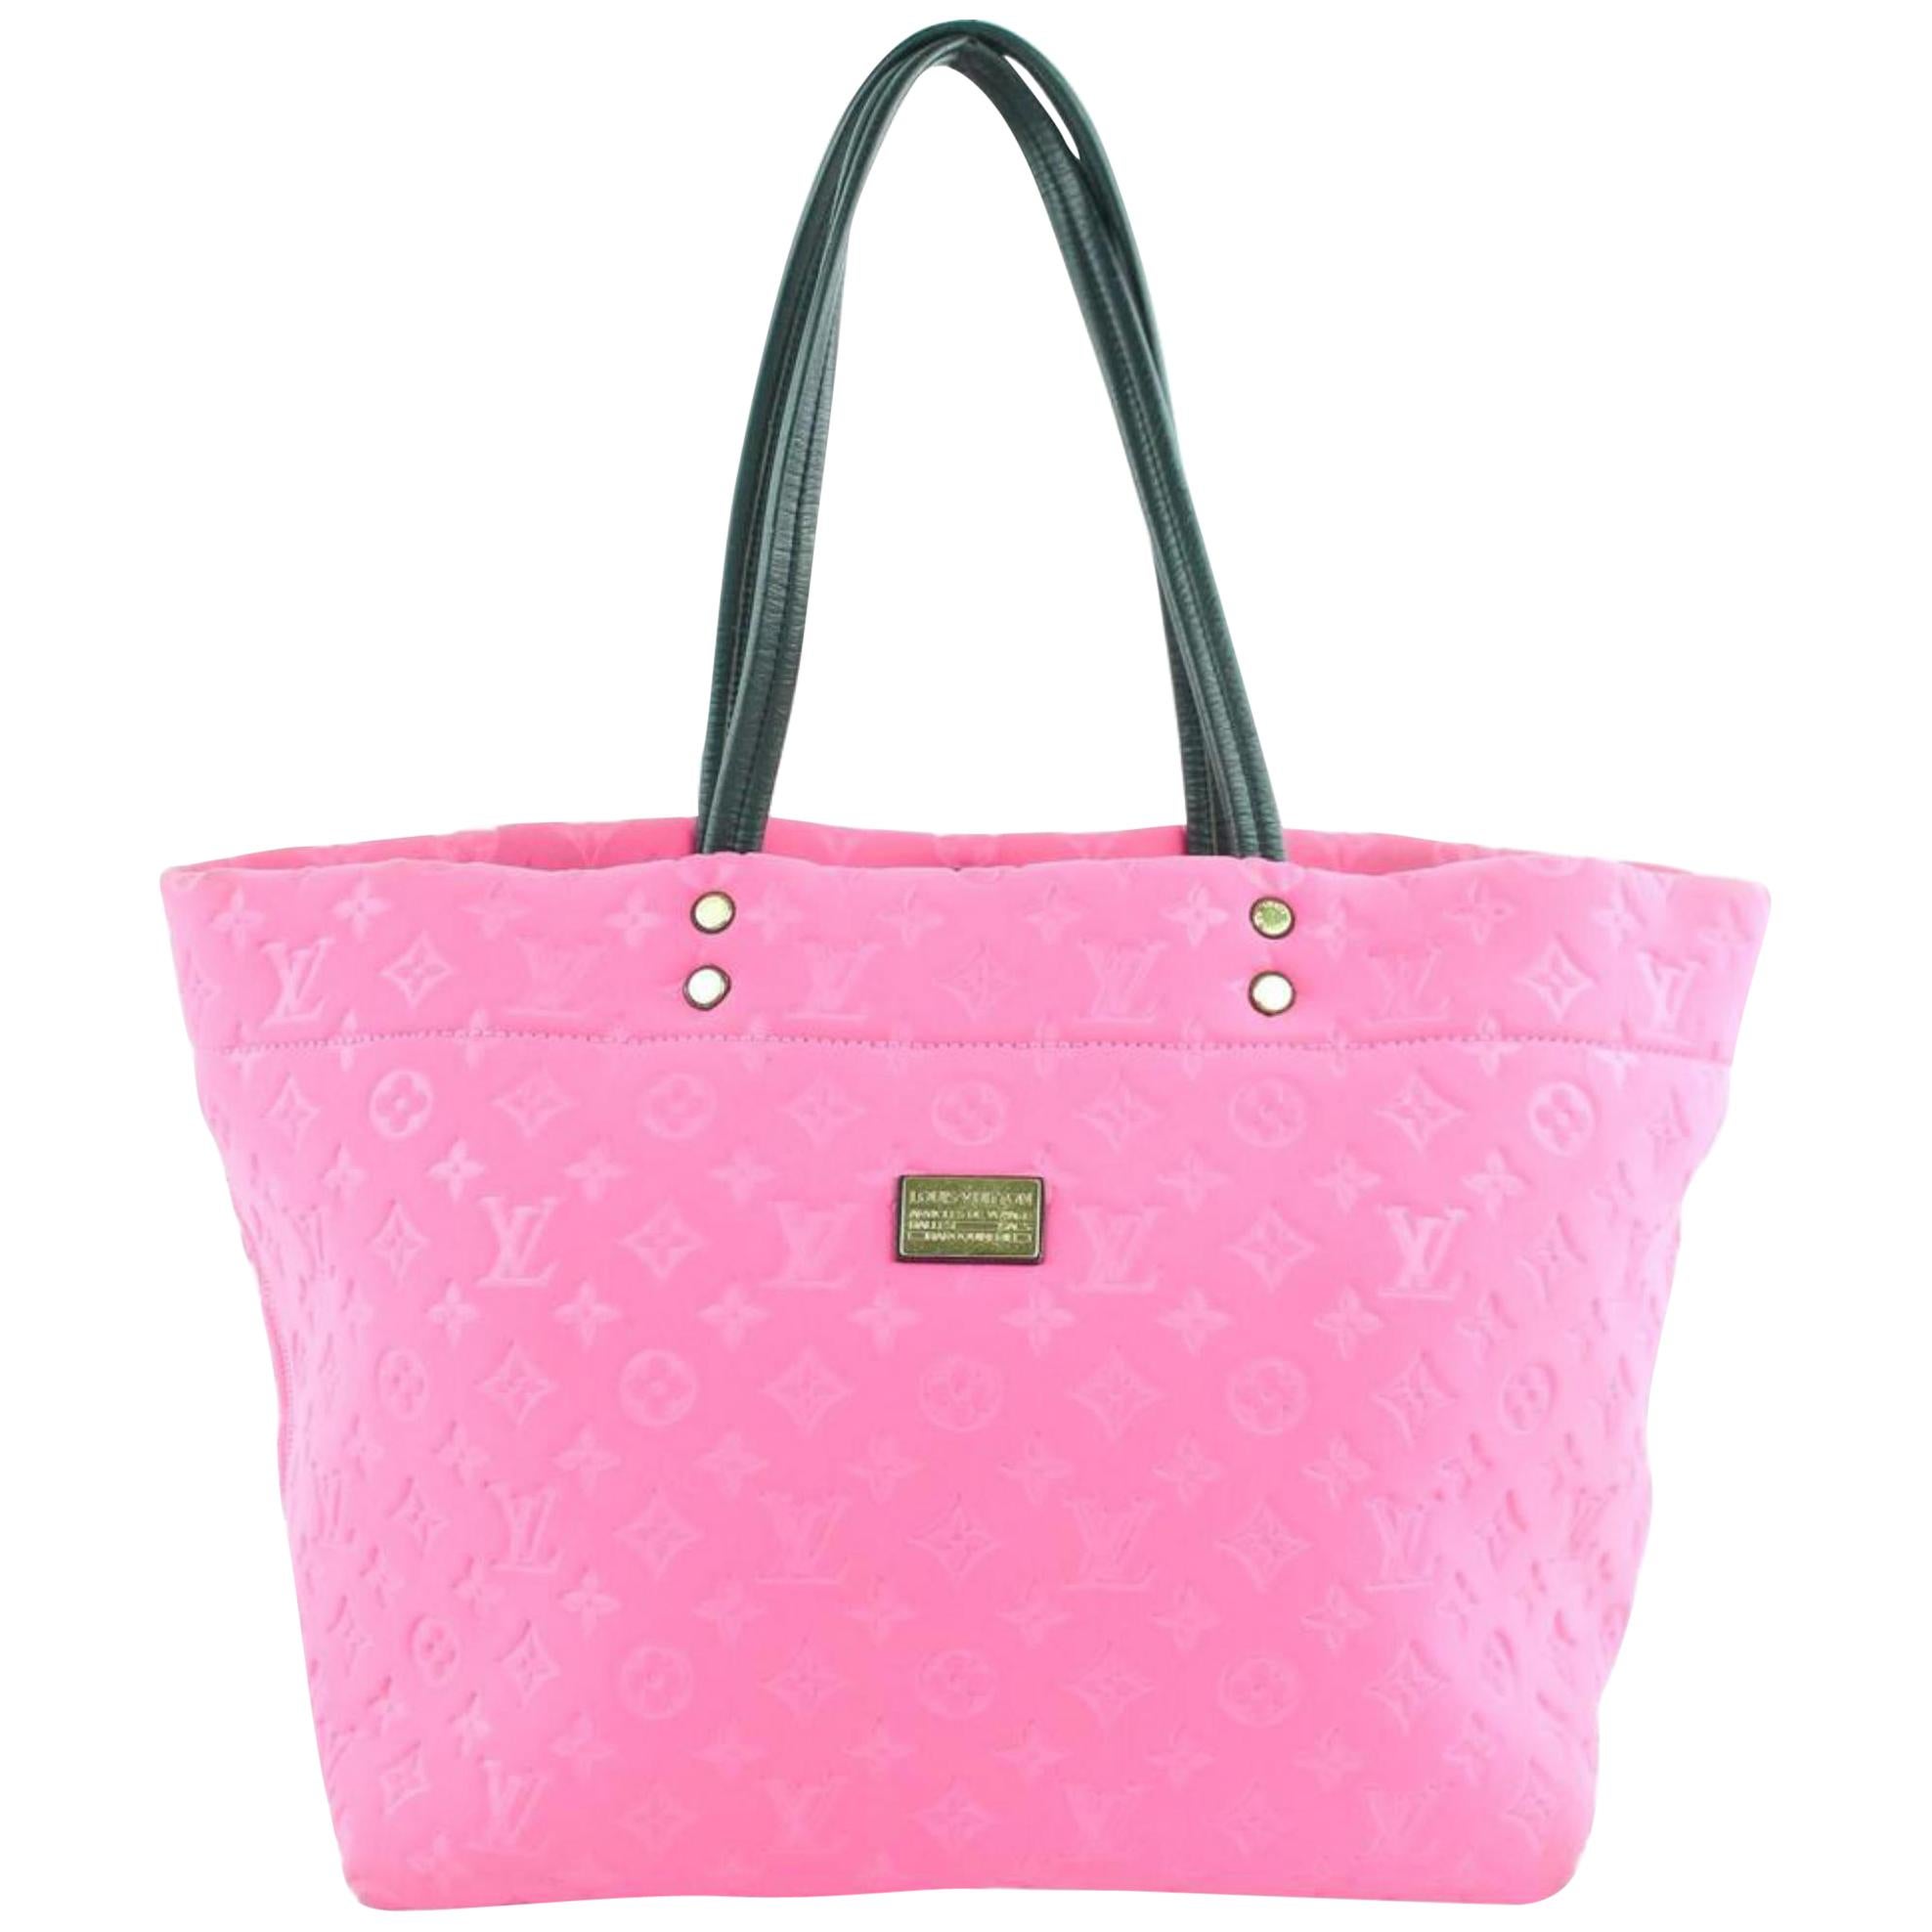 Louis Vuitton Neverfull Limited Edition Fuchsia Scubaneverfull Mm 16lz0114 Tote For Sale